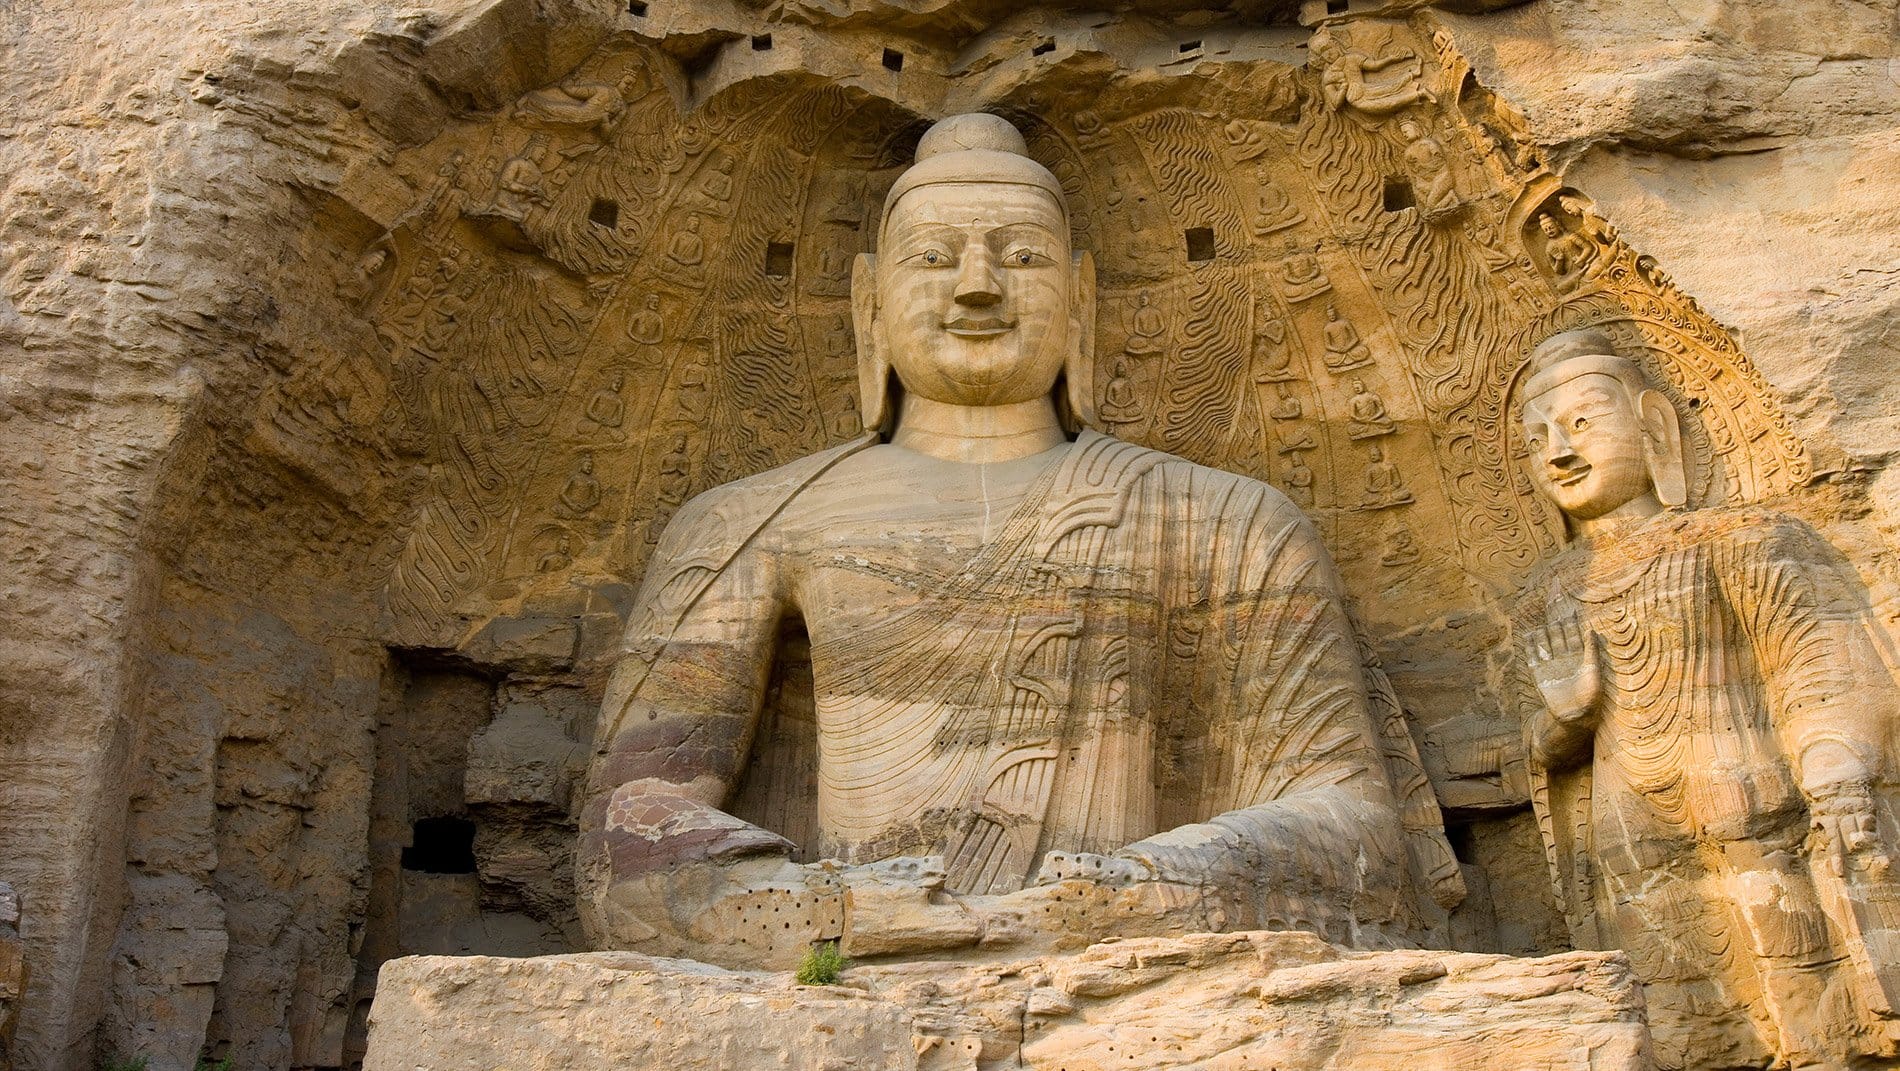 Yungang Caves~With over 250 caves and 50,000 sculptures, carved out over more than a century, the Yungang grottoes are an outstanding achievement of Buddhist architecture and art.